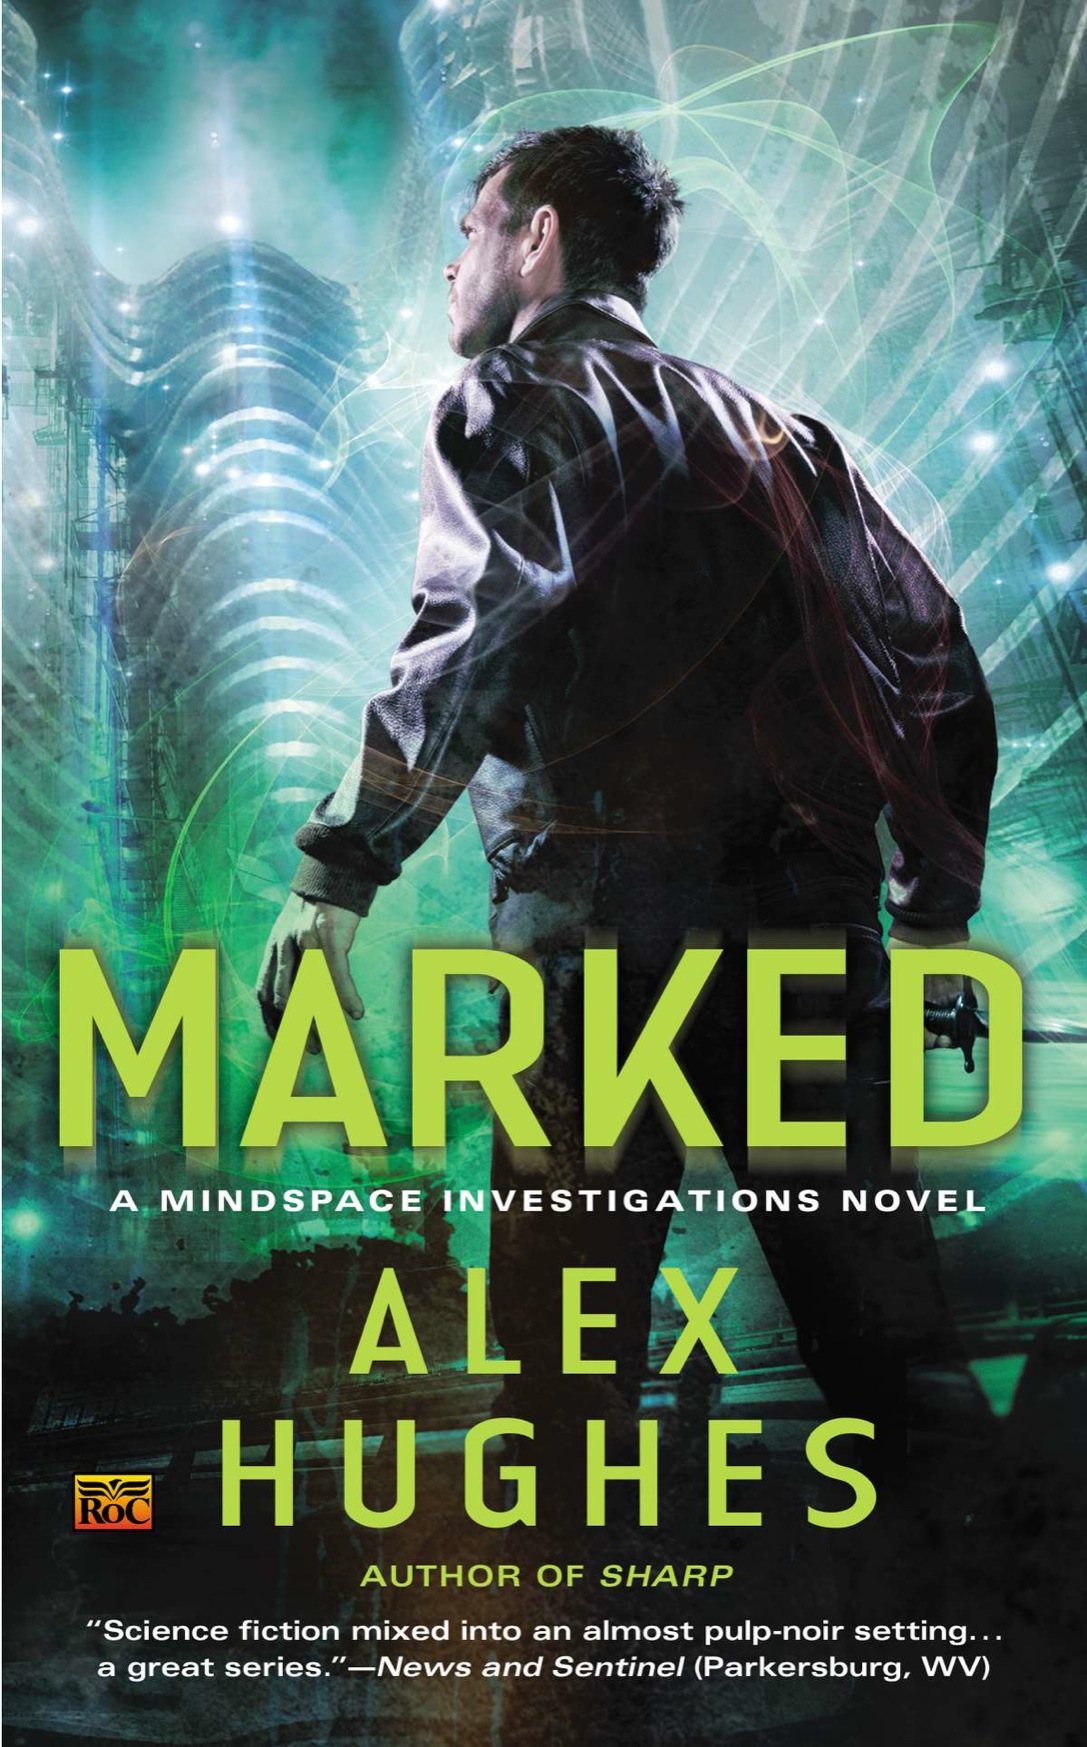 Marked (2014) by Alex Hughes